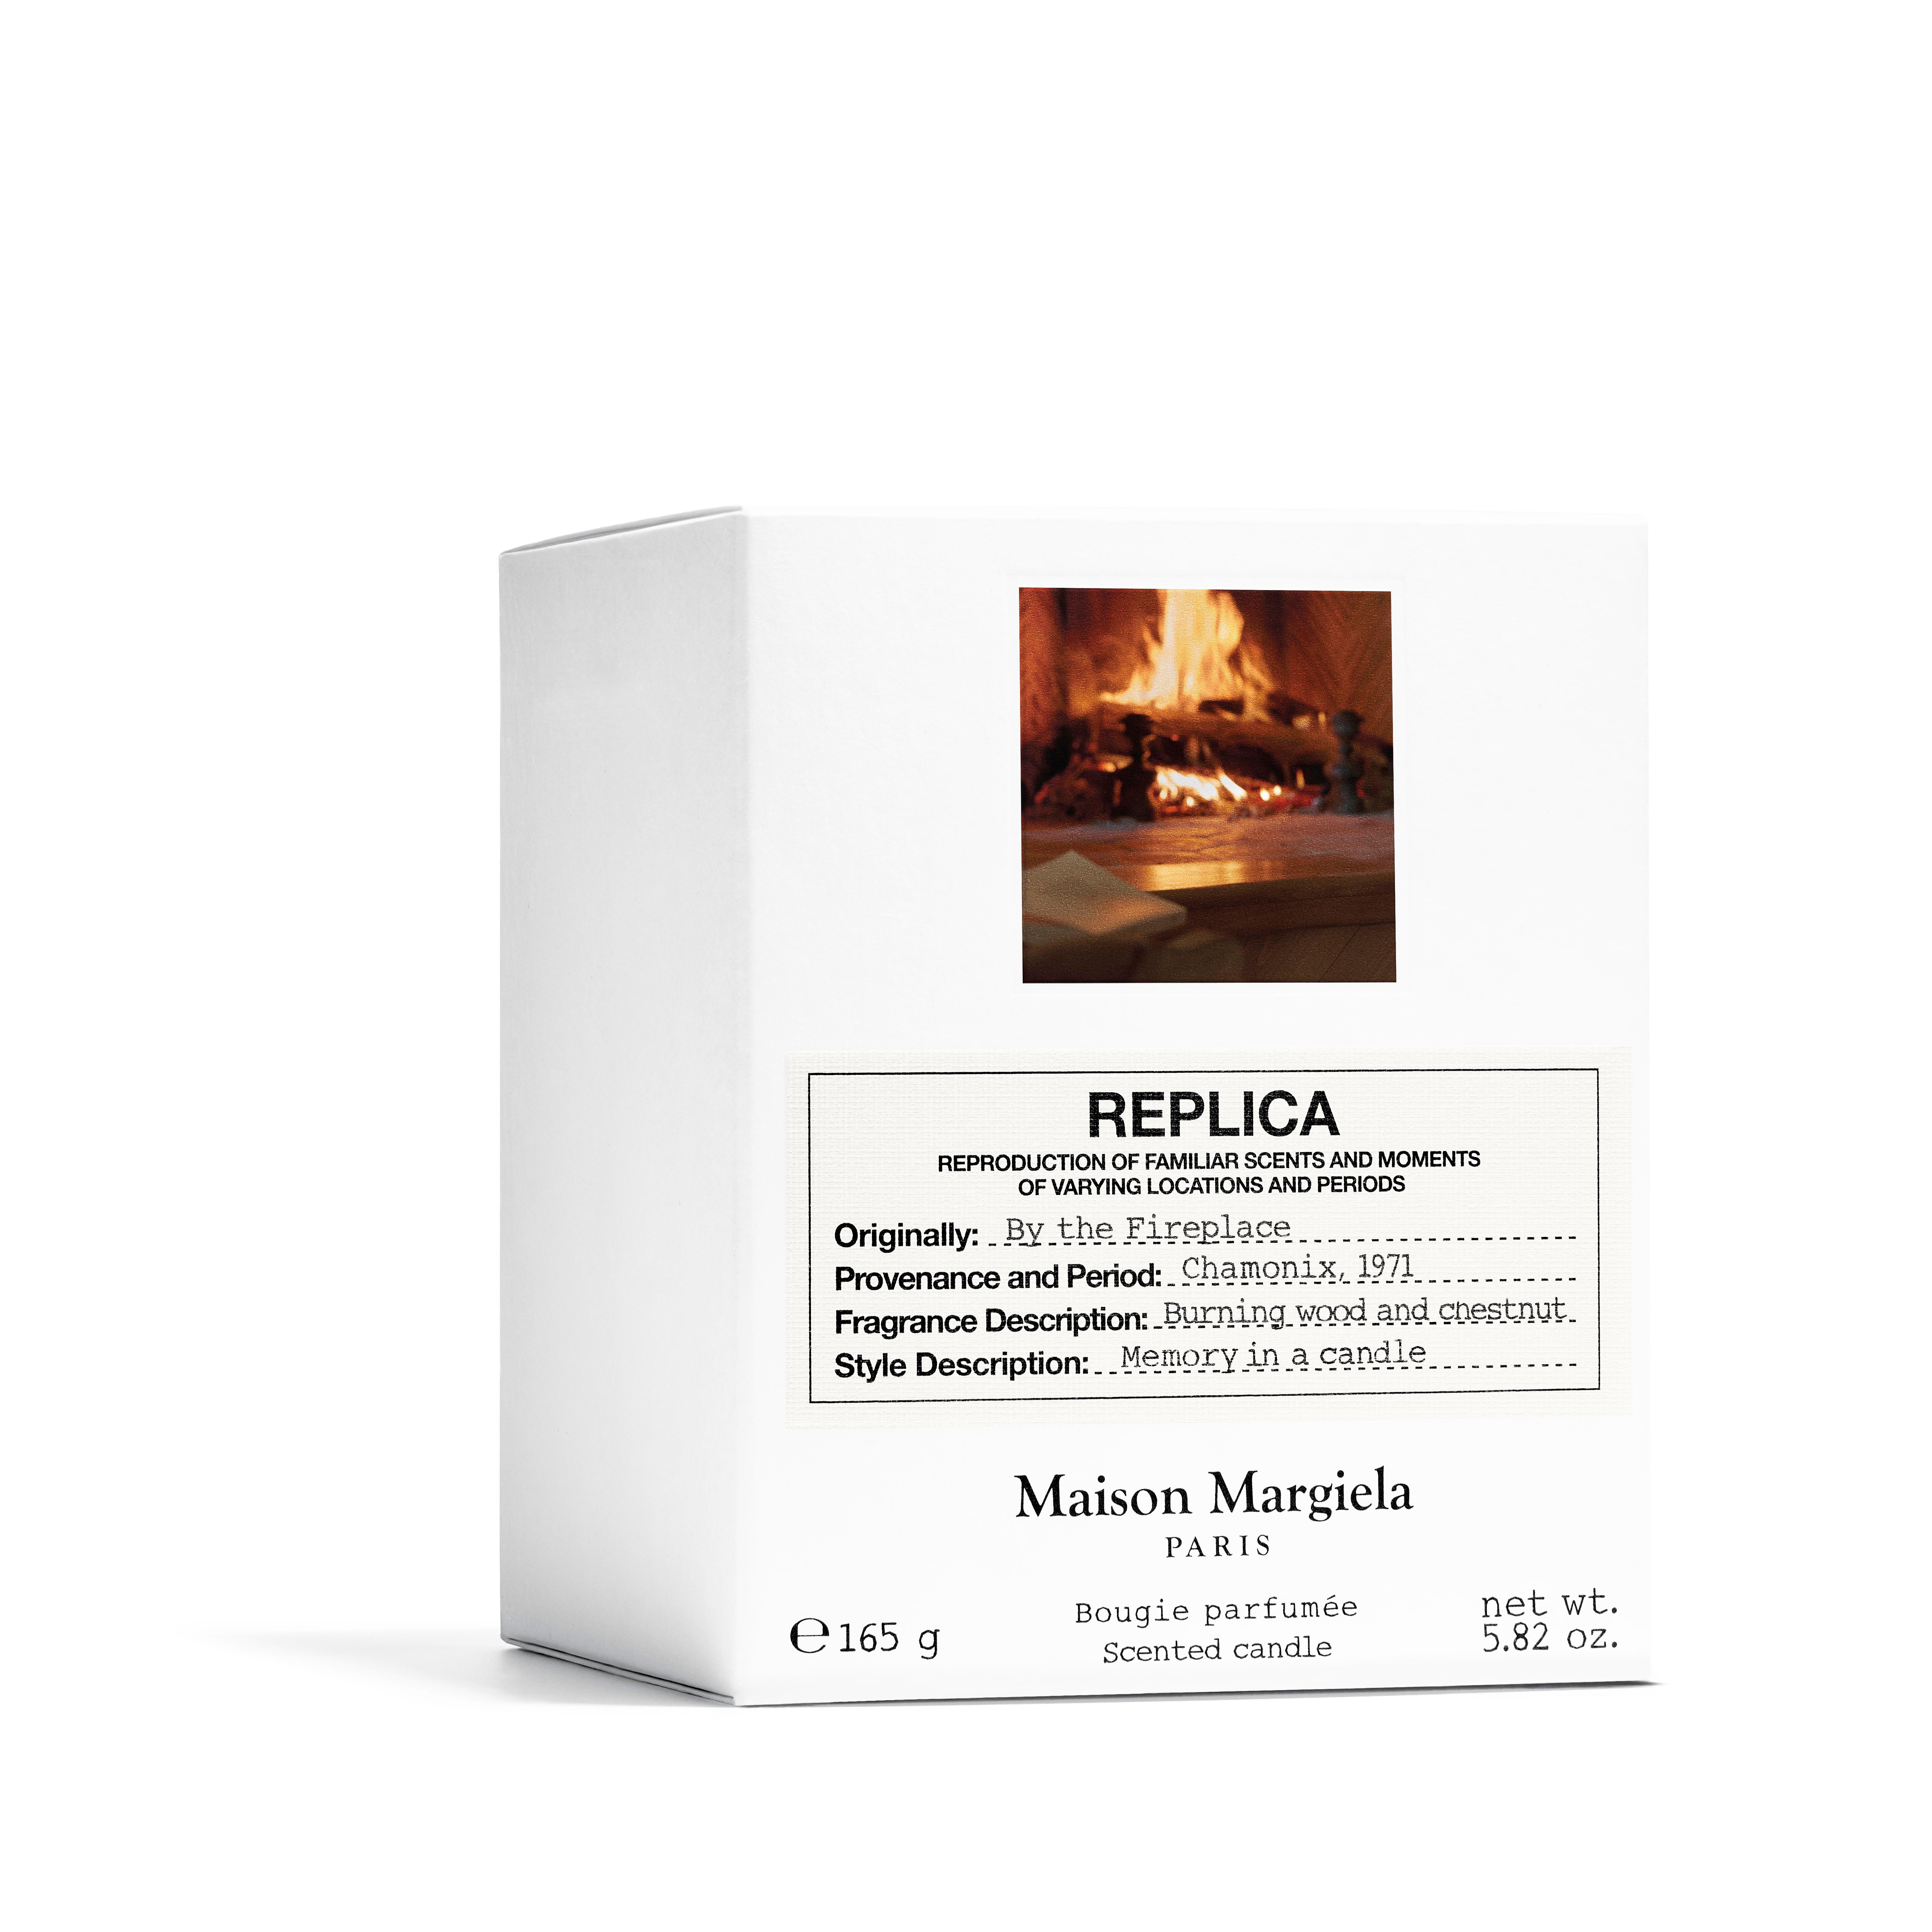 Margiela replica by the fireplace. Maison Margiela духи Replica by the Fireplace. Maison Martin Margiela Replica by the Fireplace EDT (30 мл). Maison Margiela Replica by the Fireplace туалетная вода 100 мл. Парфюм by the Fireplace Maison Martin Margiela.